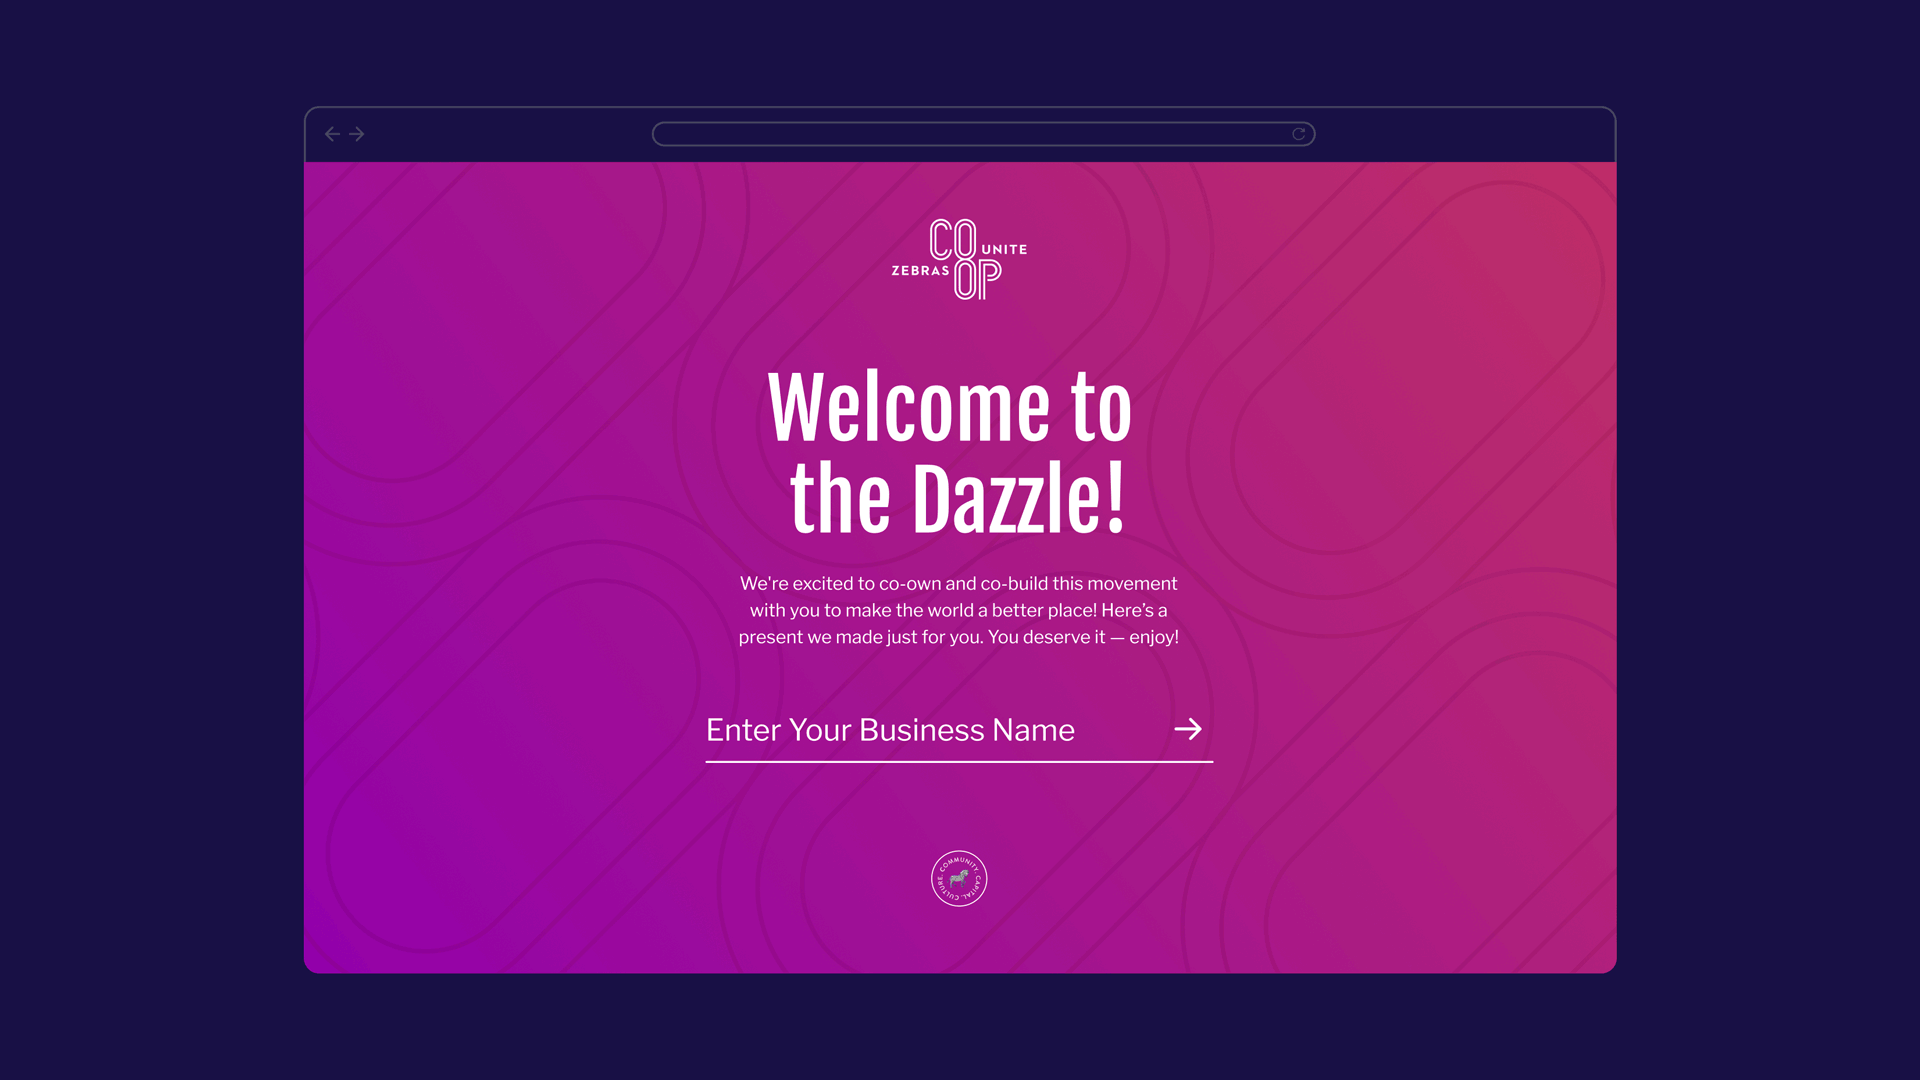 GIF of the new member Welcome certificate for Zebras Unite